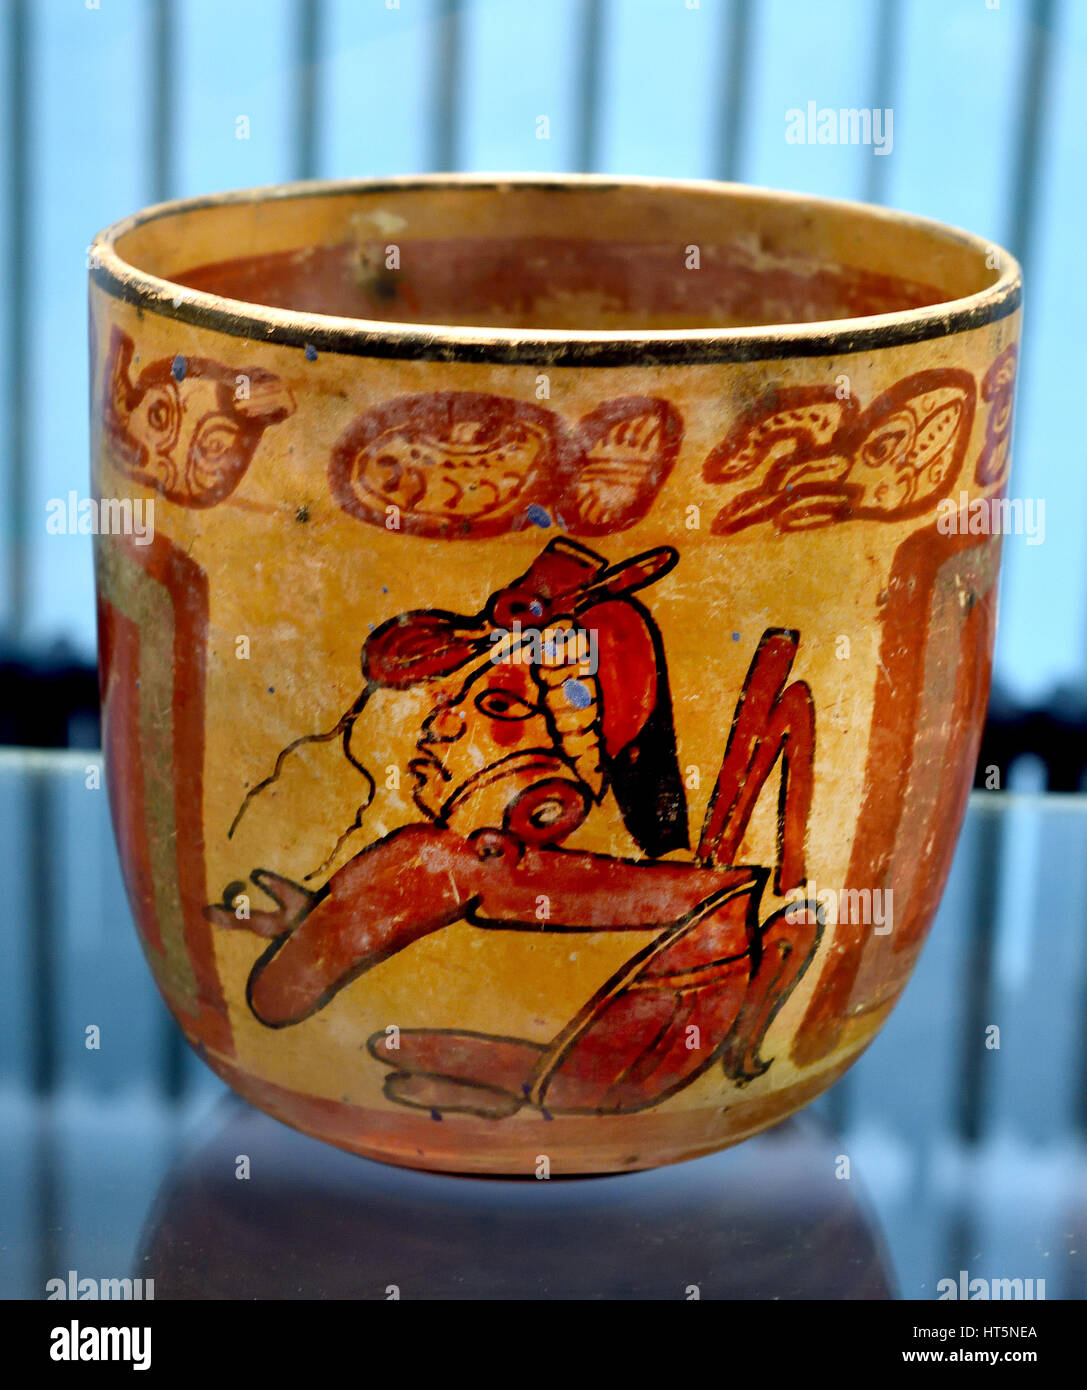 Clay pot Late Classics Guatemala Maya (Culture) 15.8 x 16.4 x 16.3 cm background with painting in red, black and gray The Mayans - Maya Mesoamerican - Pre Columbian civilization  Central America ( 2600 BC - 1500 AD ) American Stock Photo